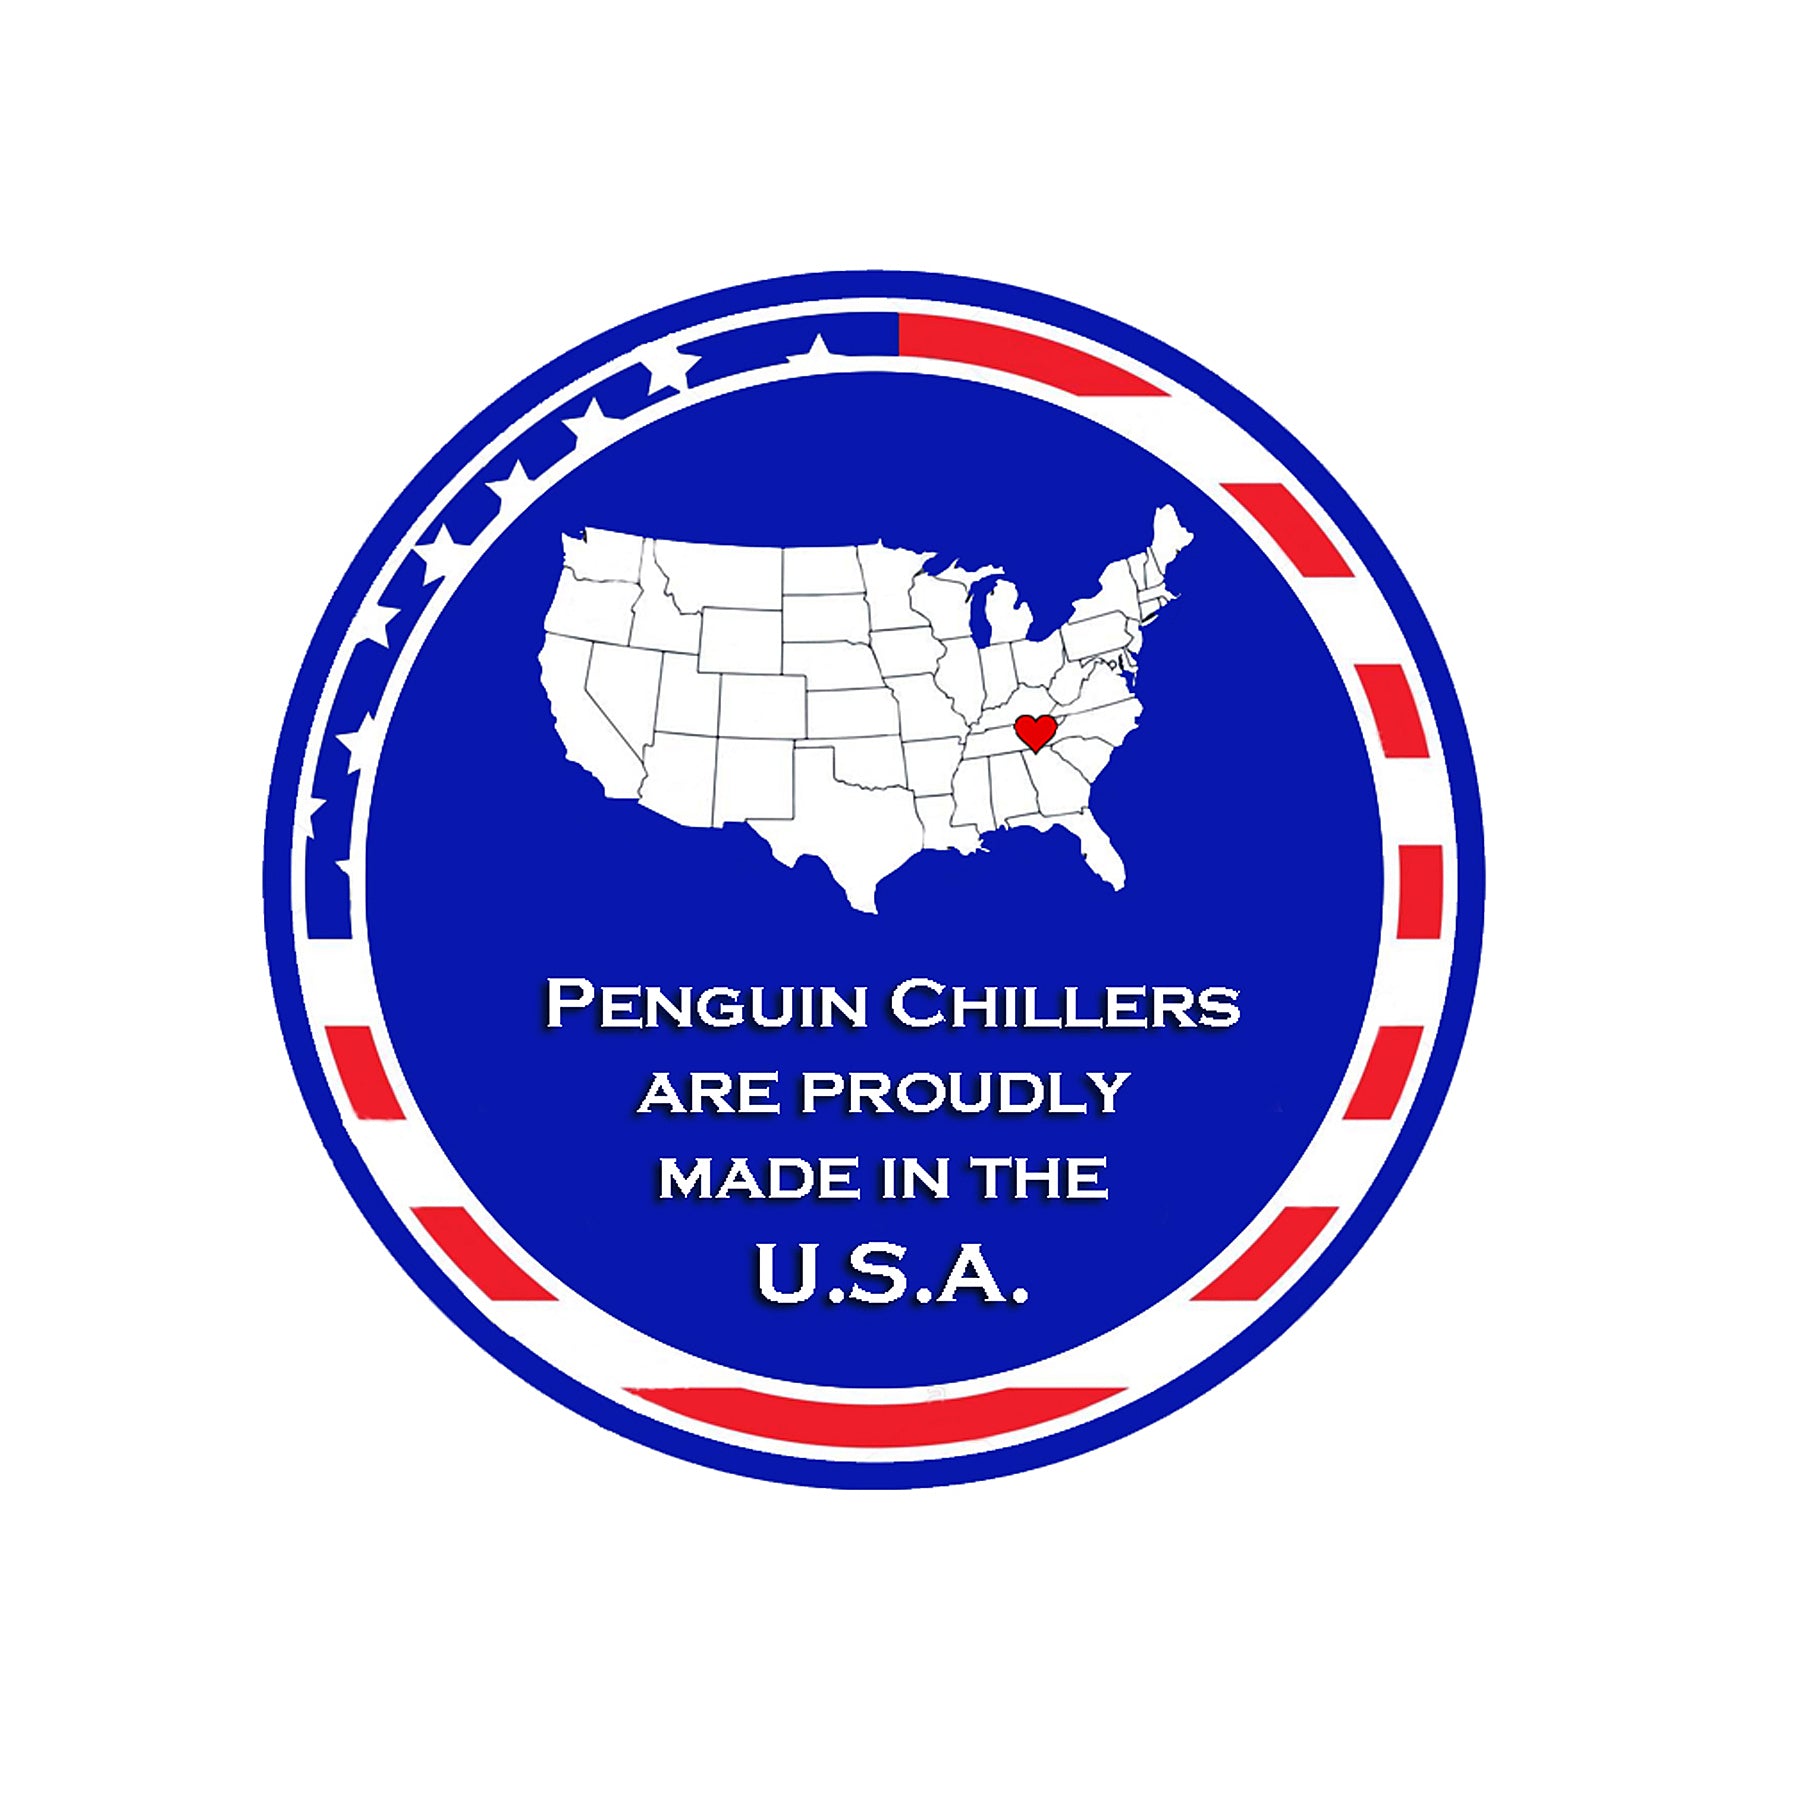 Penguin Chiller made in the USA